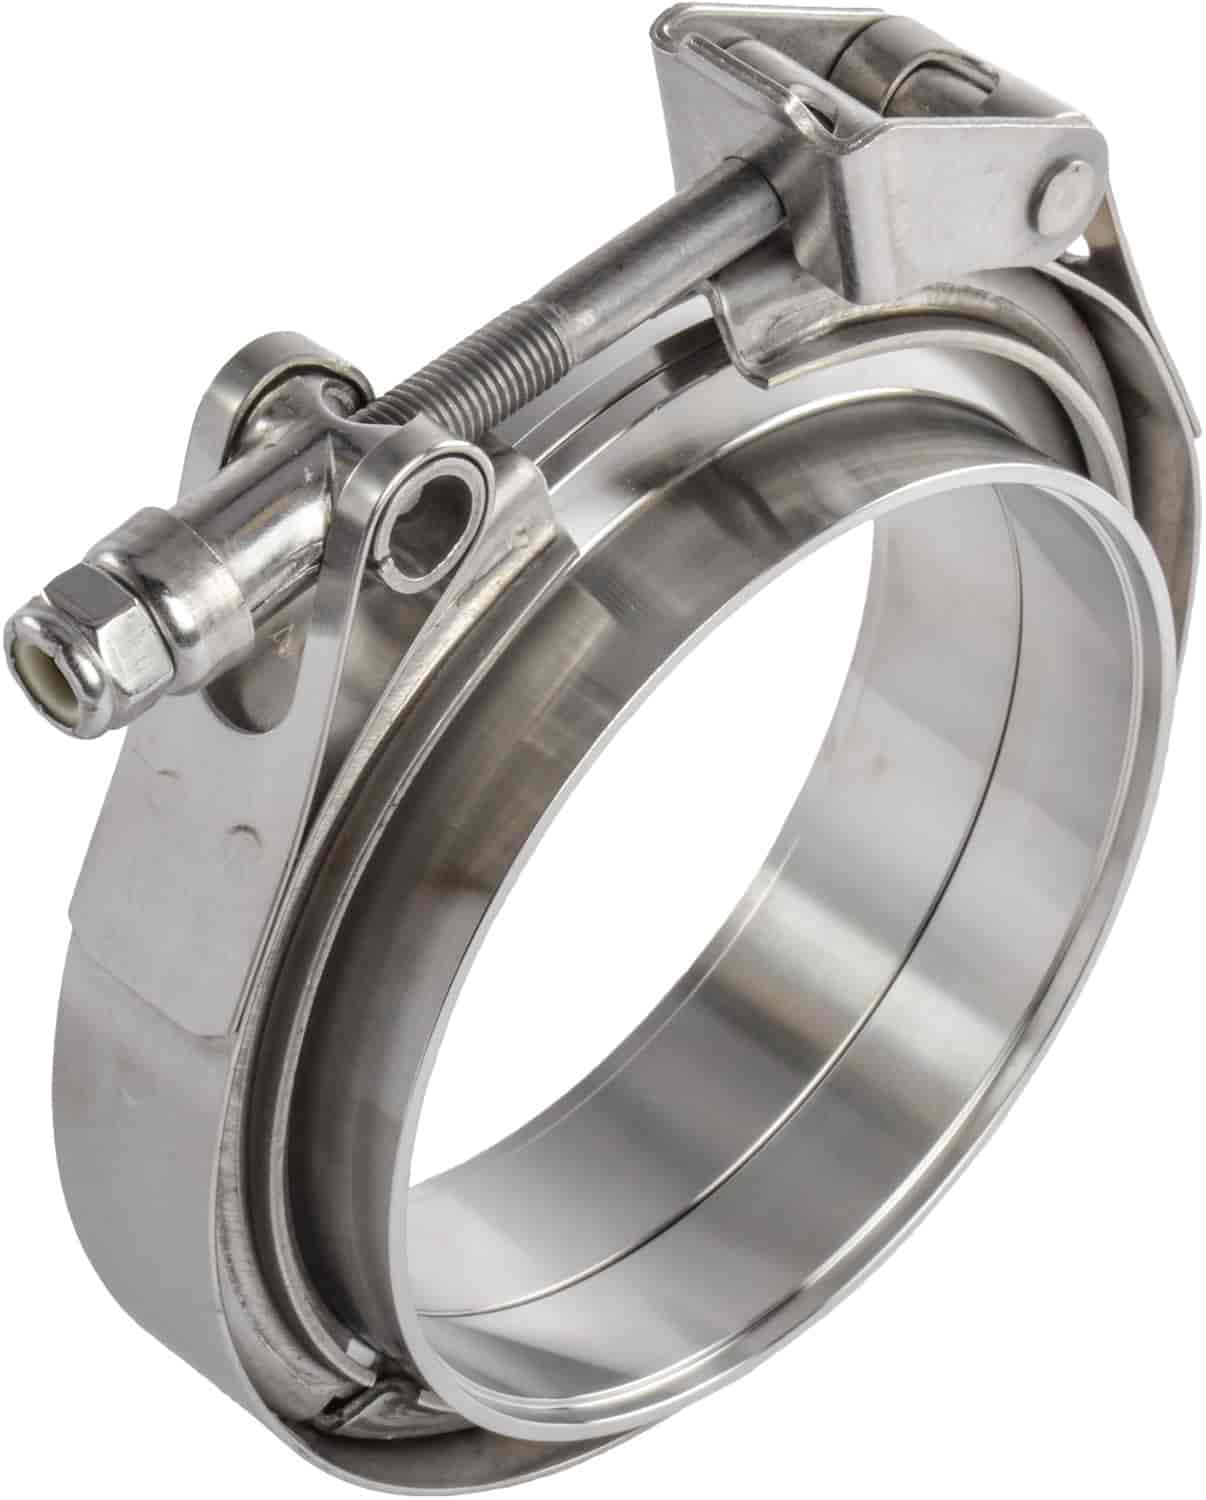 Stainless Steel Quick Release V-Band Clamp & Flanges 2.500 in.